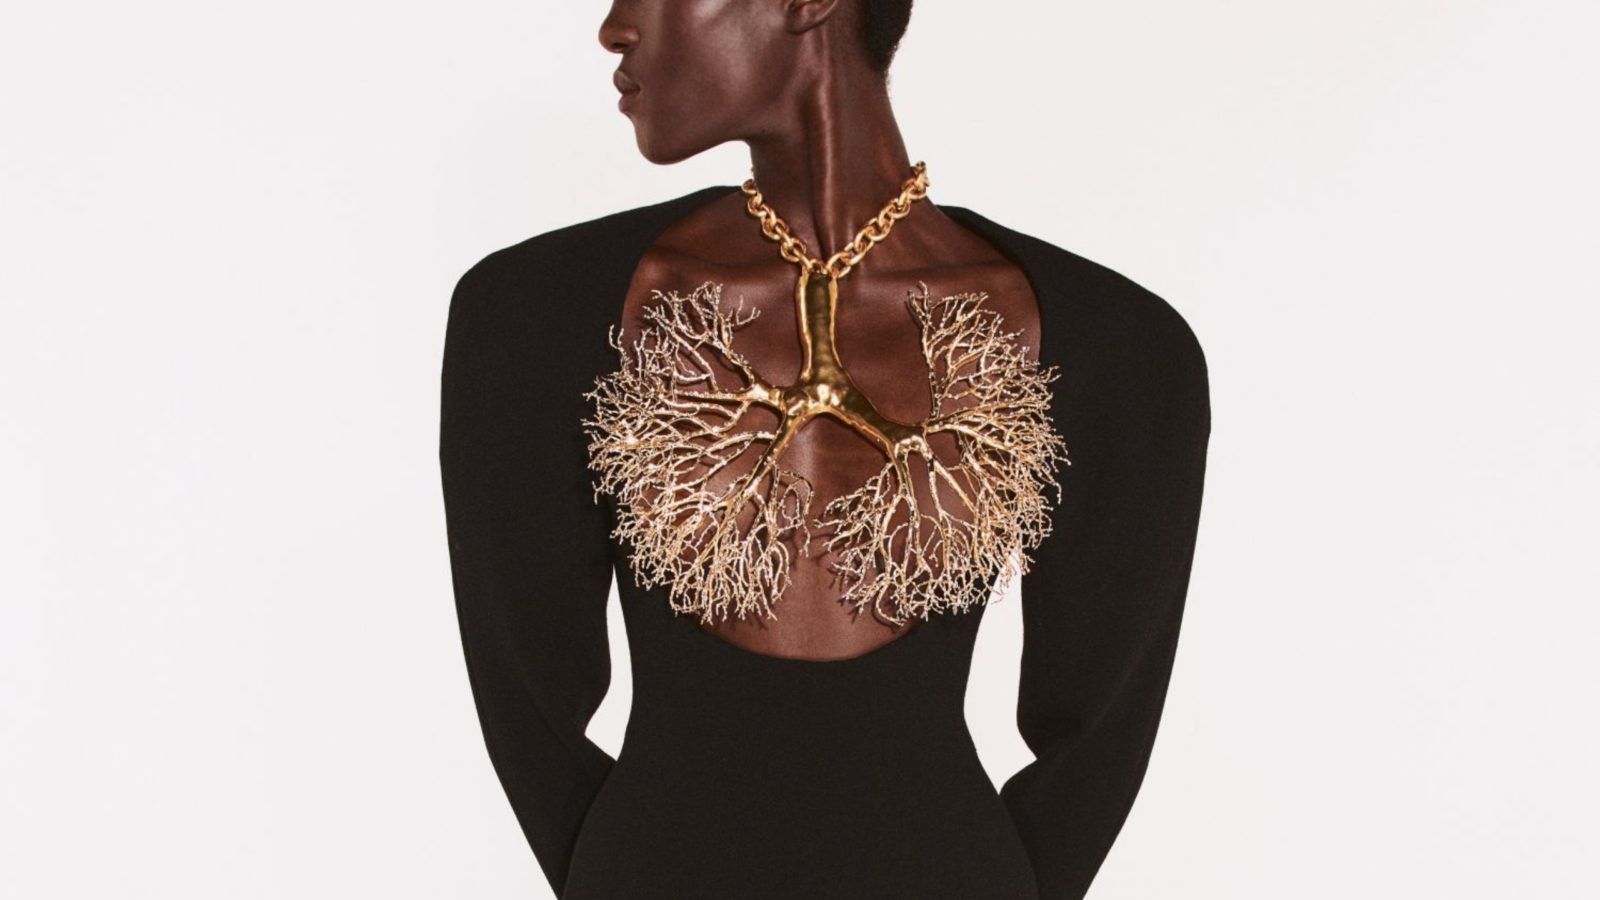 Big Statement: 10 very large necklaces inspired by that viral Bella Hadid look